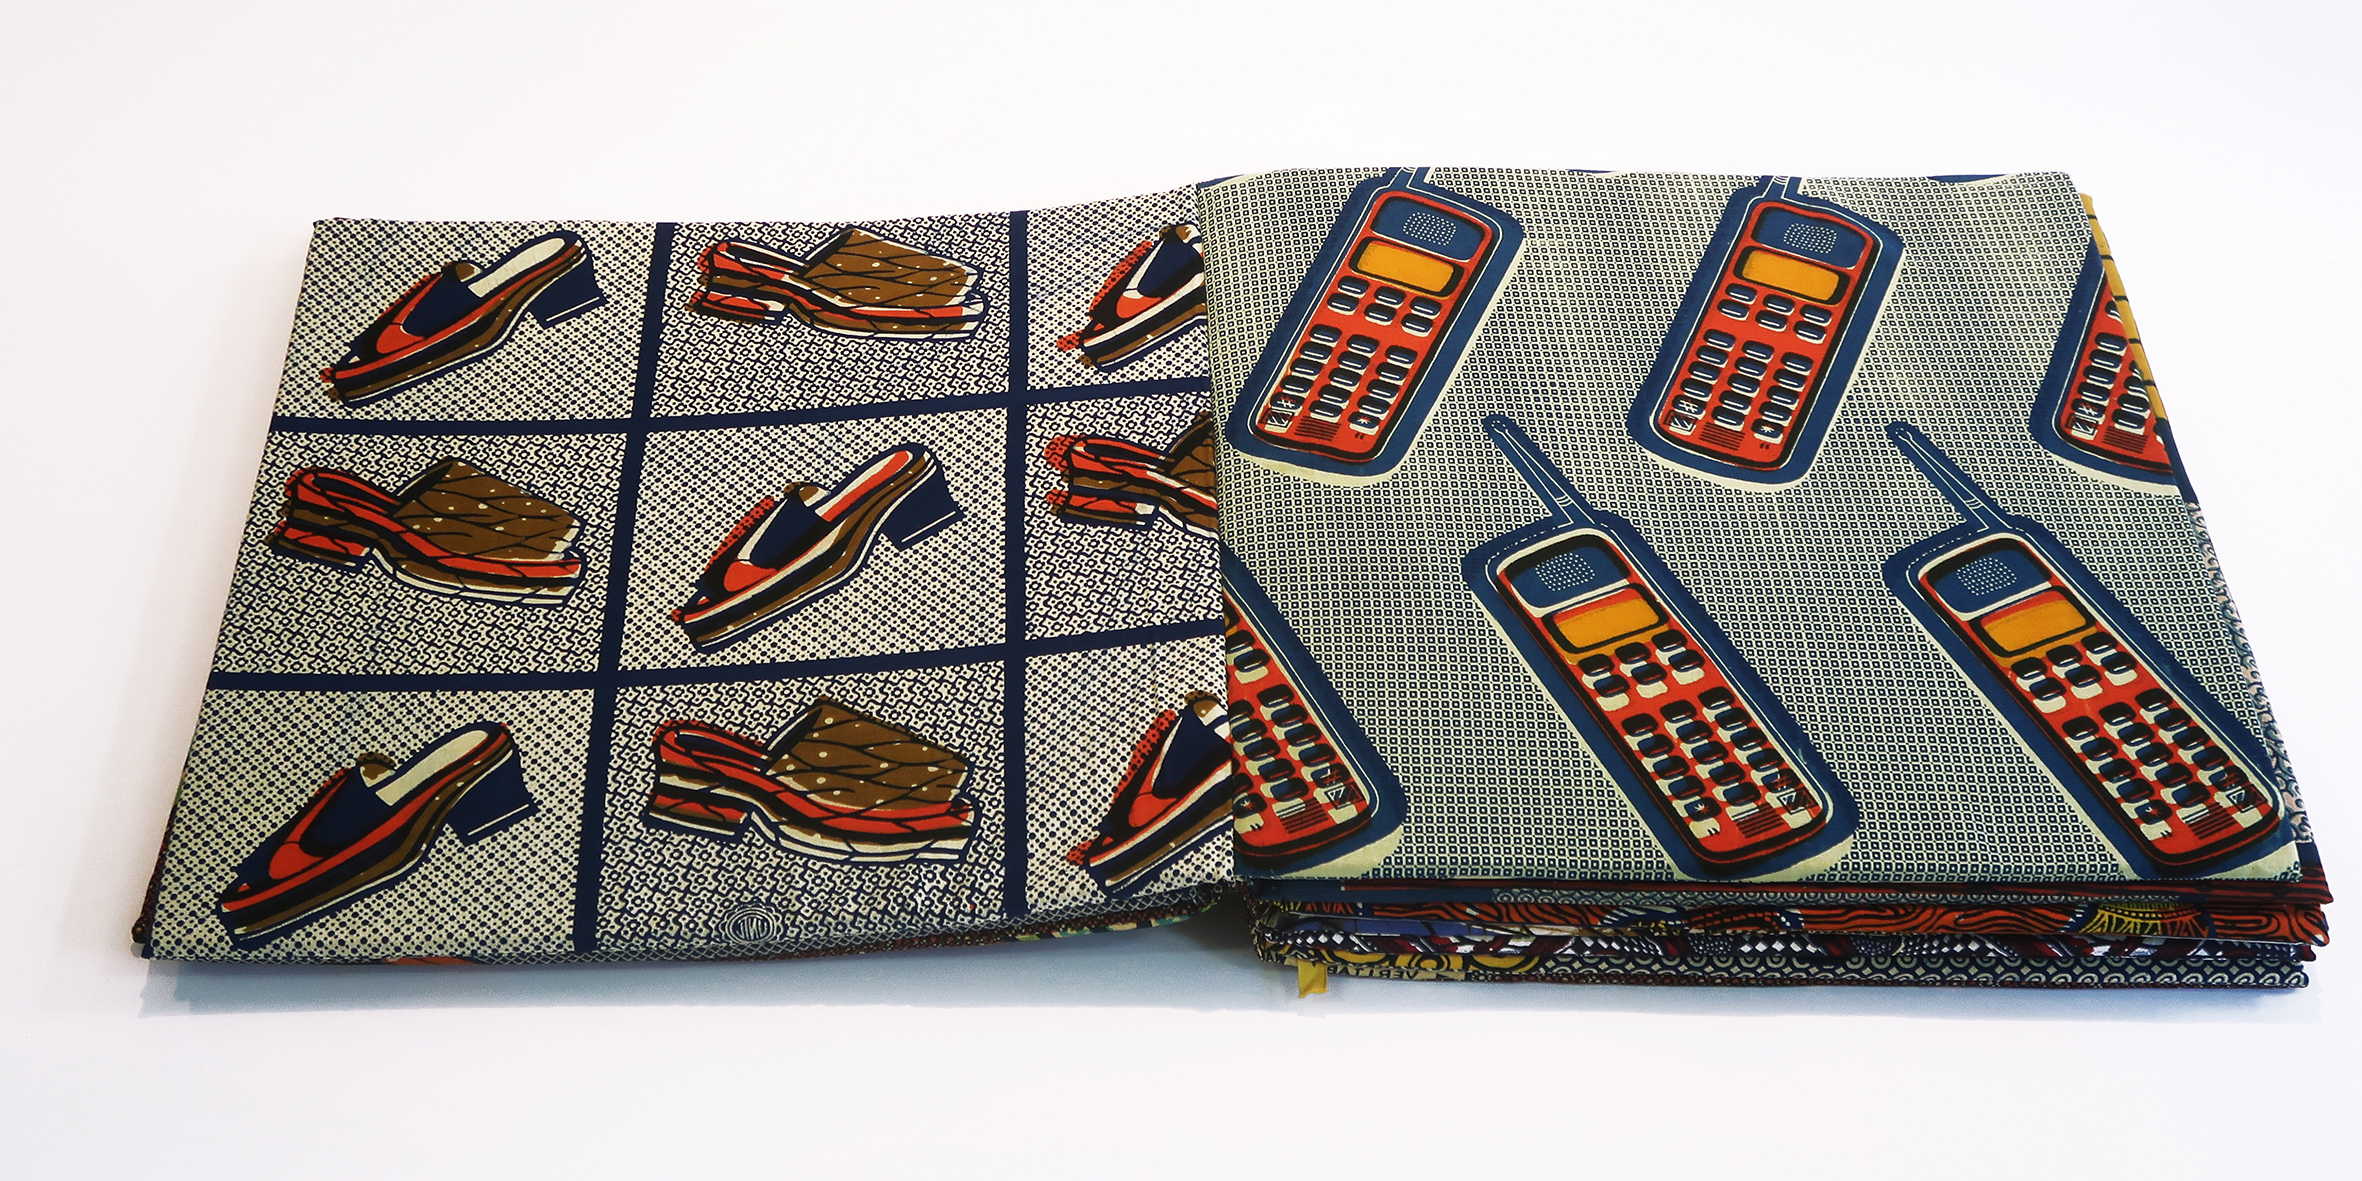 open fabric book with patterns of shoes and cellphones